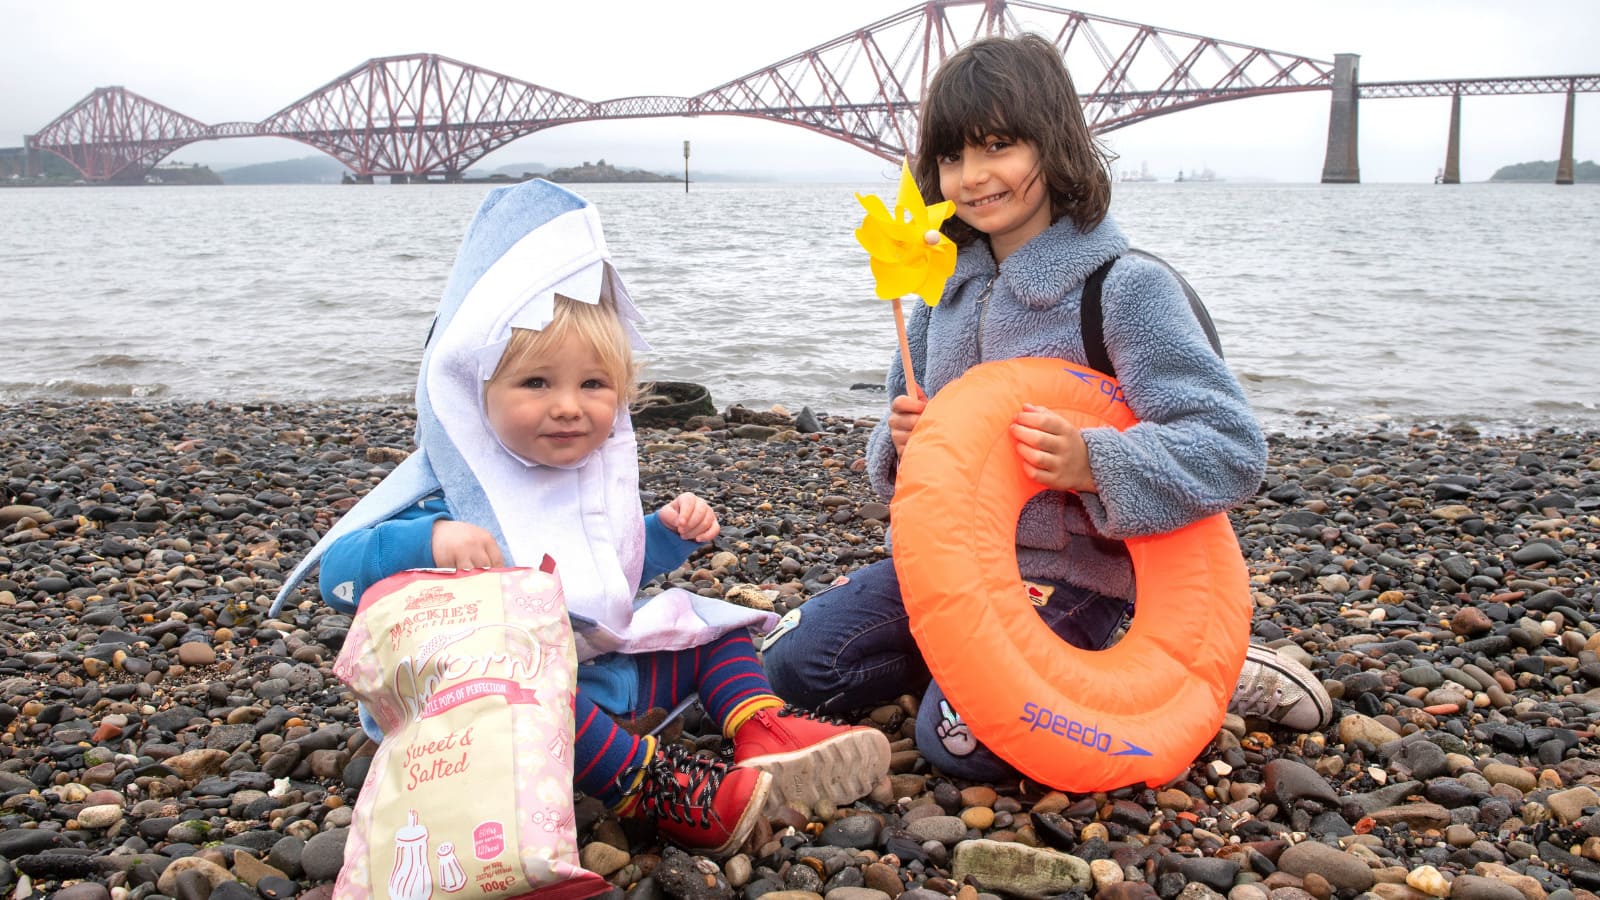 Two children sit on the banks of the Forth with the bridges in the distance behind them